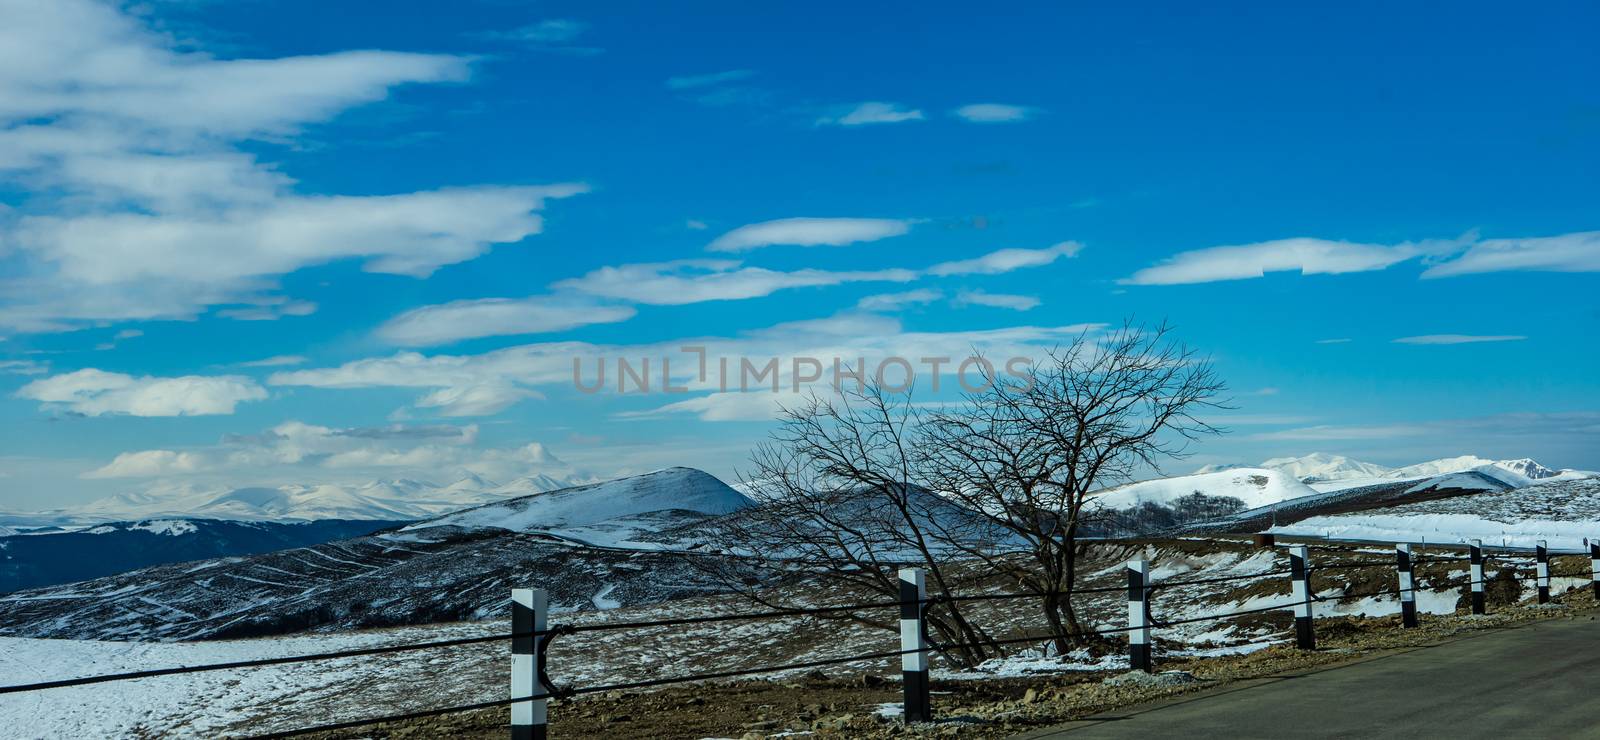 Blue winter sky and road in mountain, winter time in Caucasus mountain range close to Tbilisi, Georgia